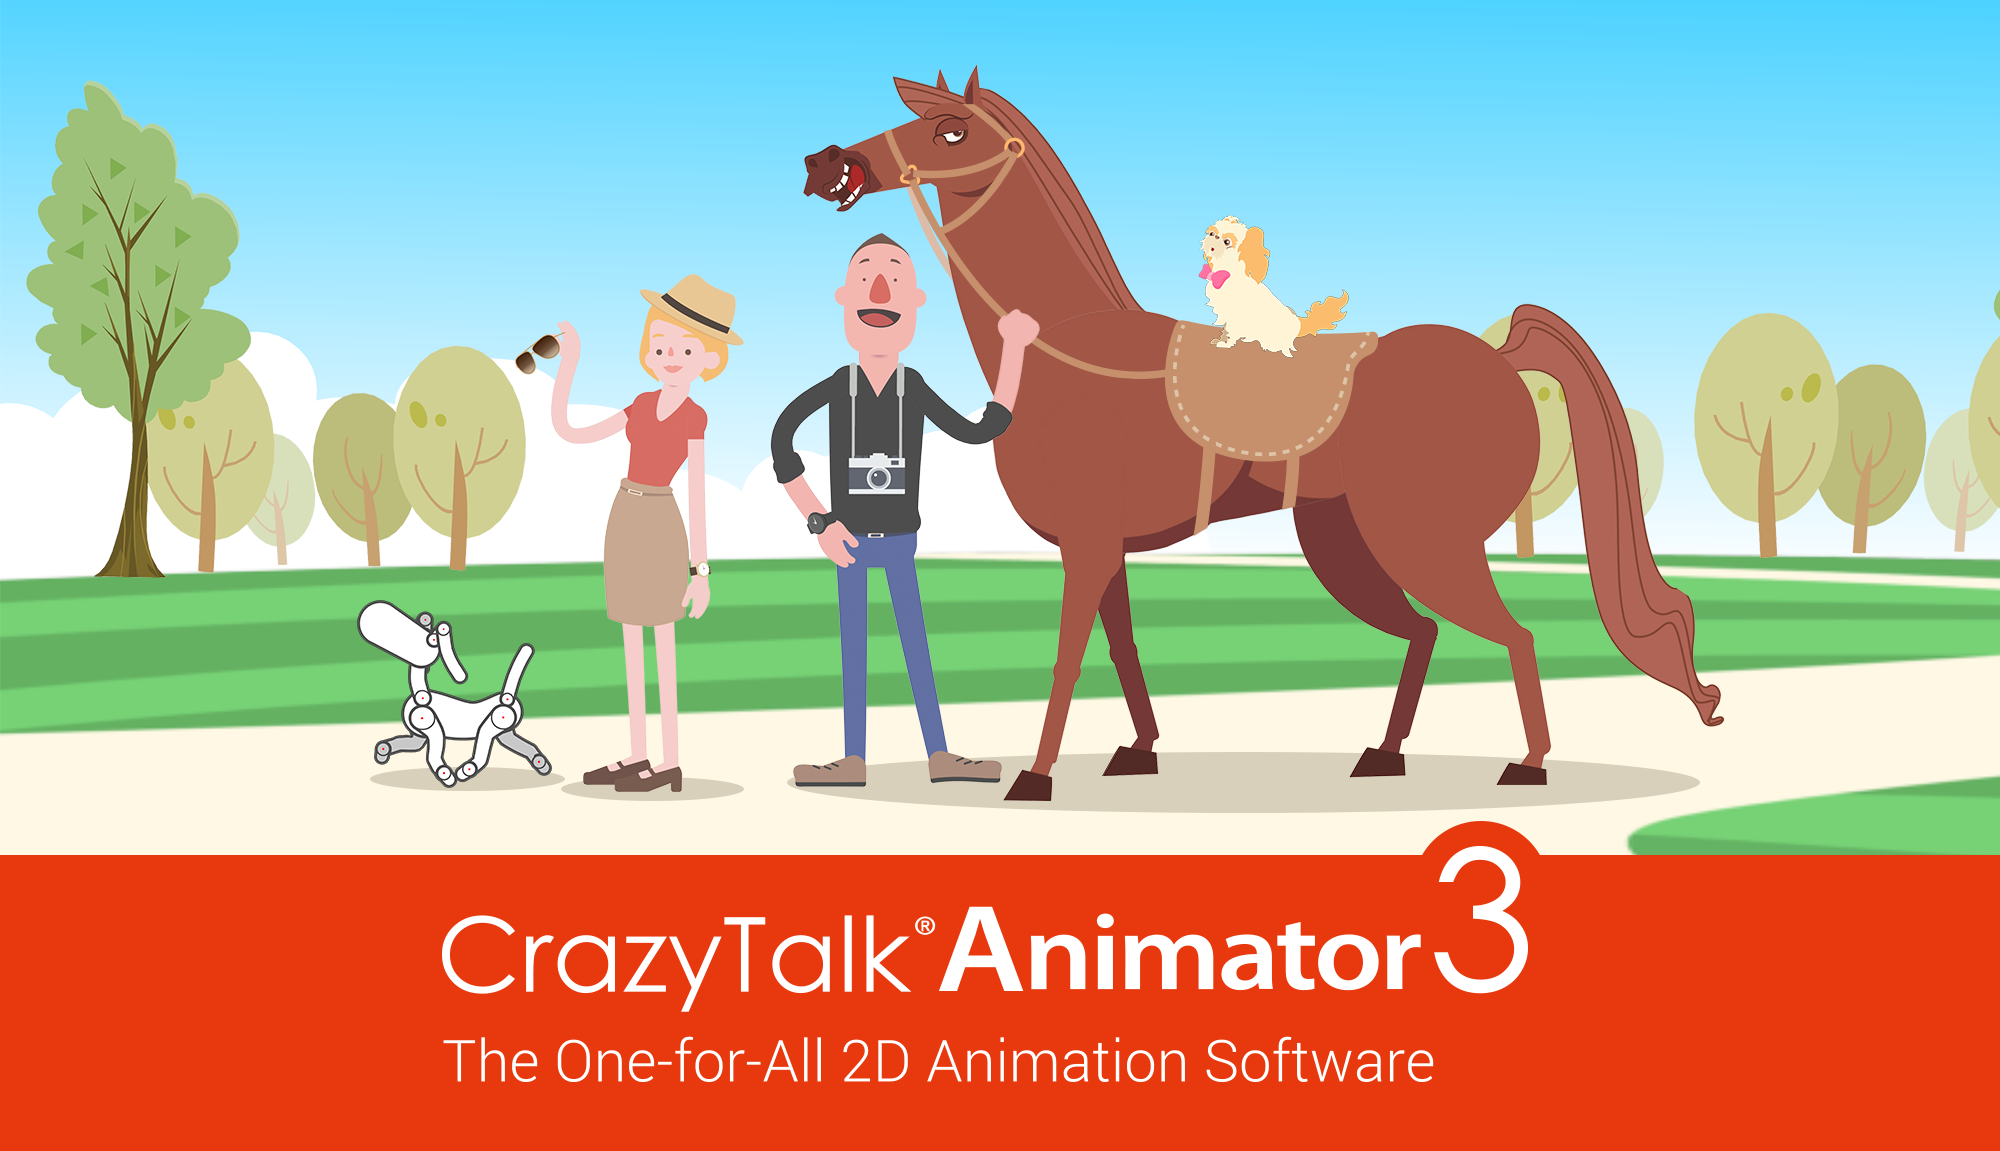 crazytalk-animator-3-the-one-for-all-2d-animation-software